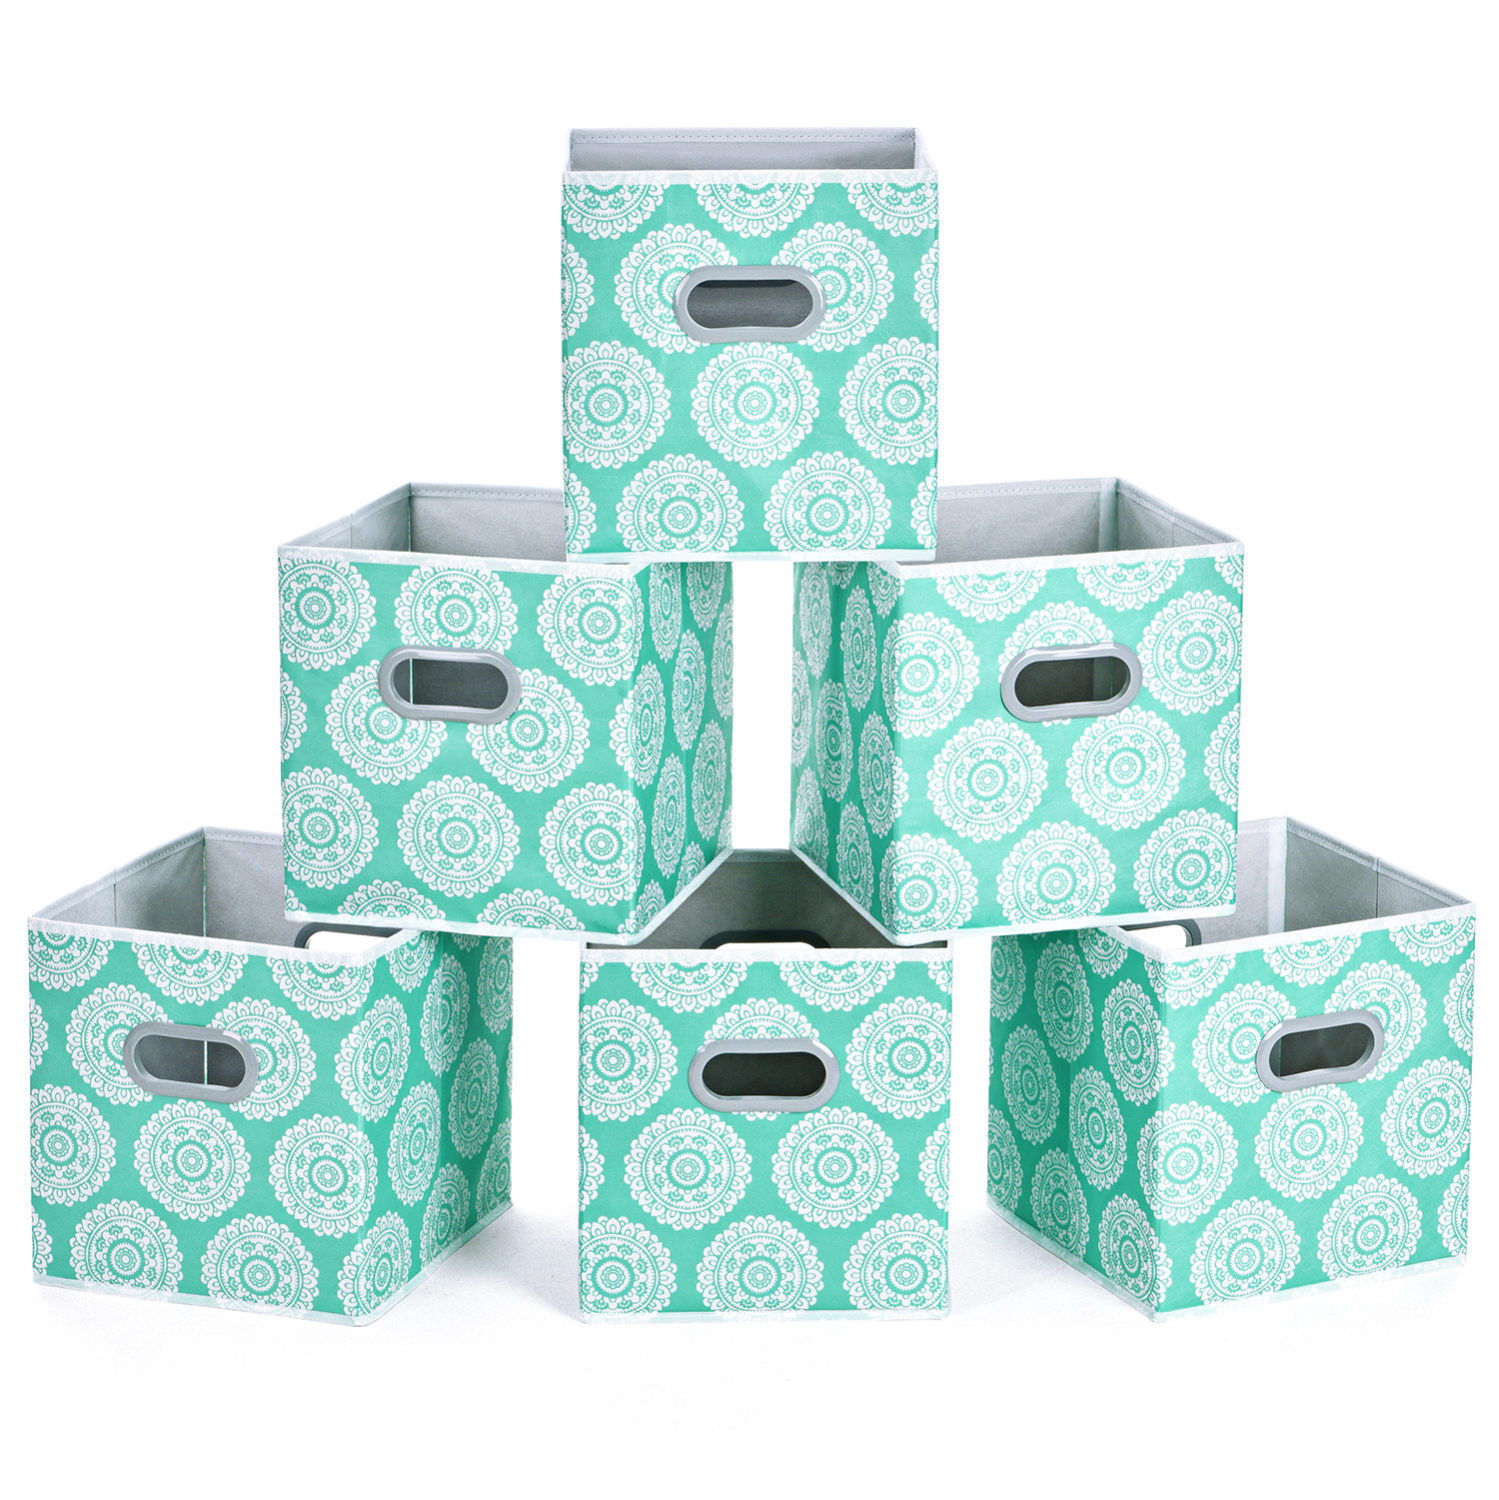 Cloth Storage Bins Maidmax Set Of 6 Foldable Collapsible Fabric intended for size 1499 X 1500